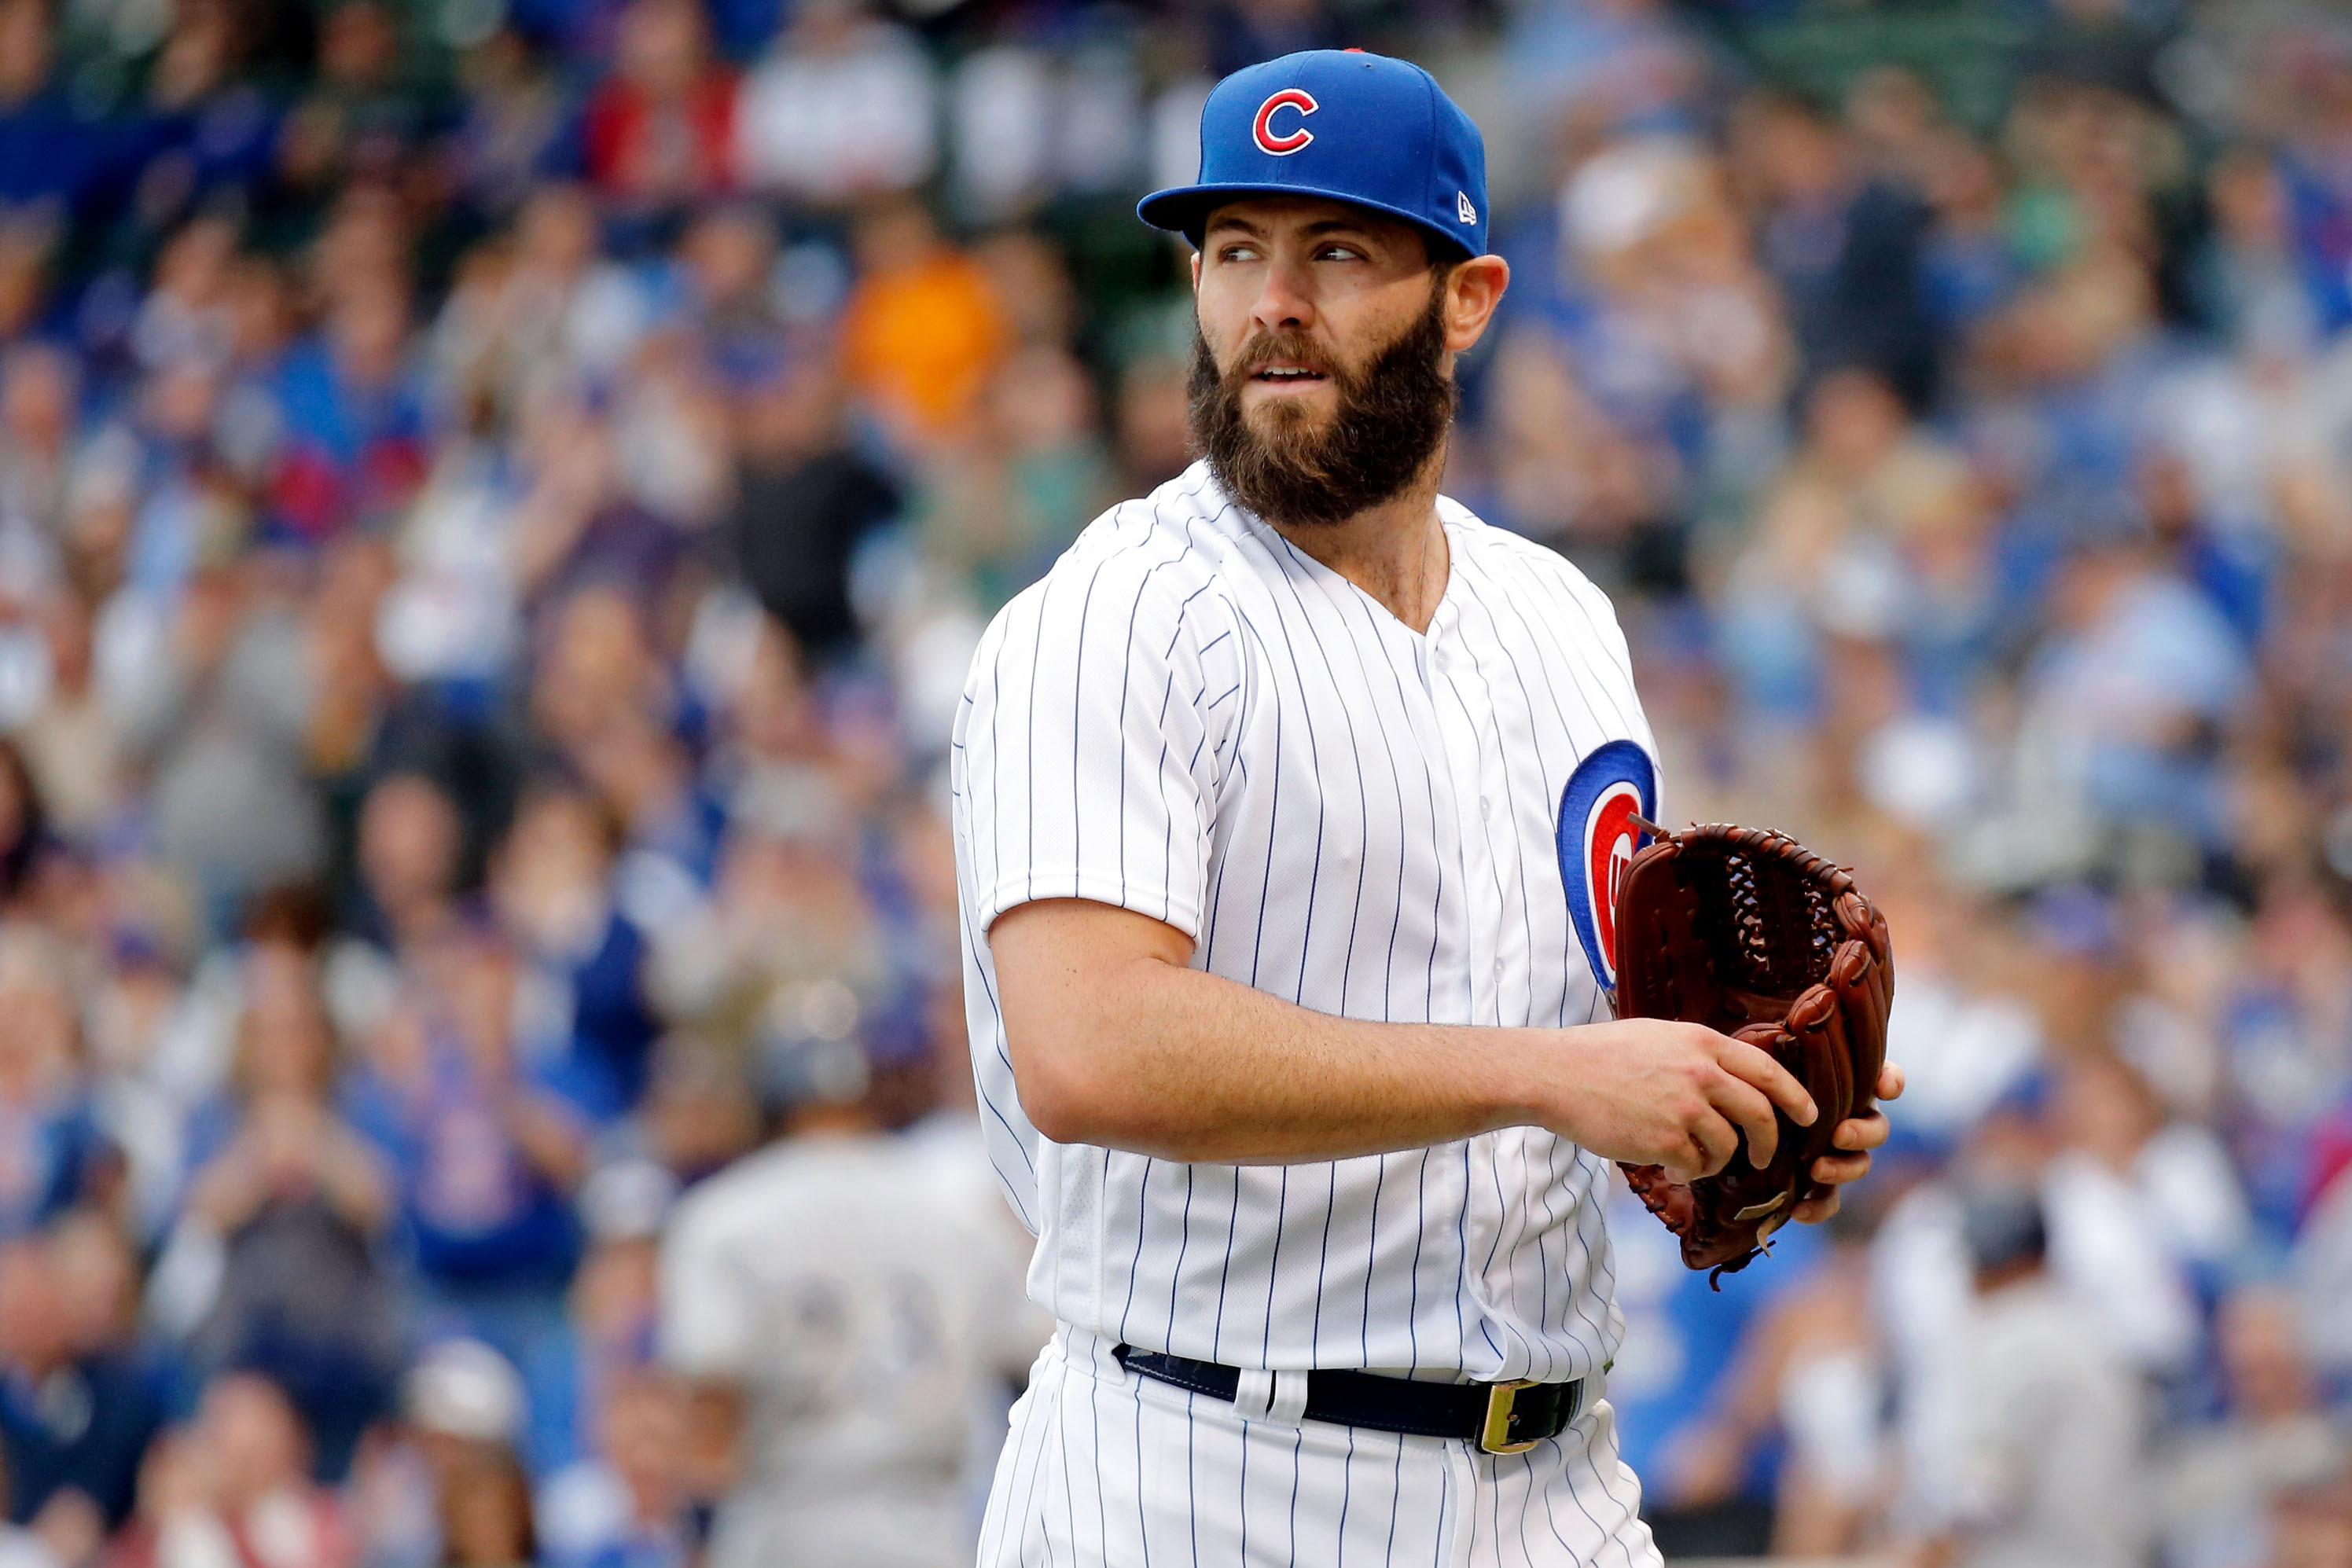 Jake Arrieta No Hitter Photos and Premium High Res Pictures